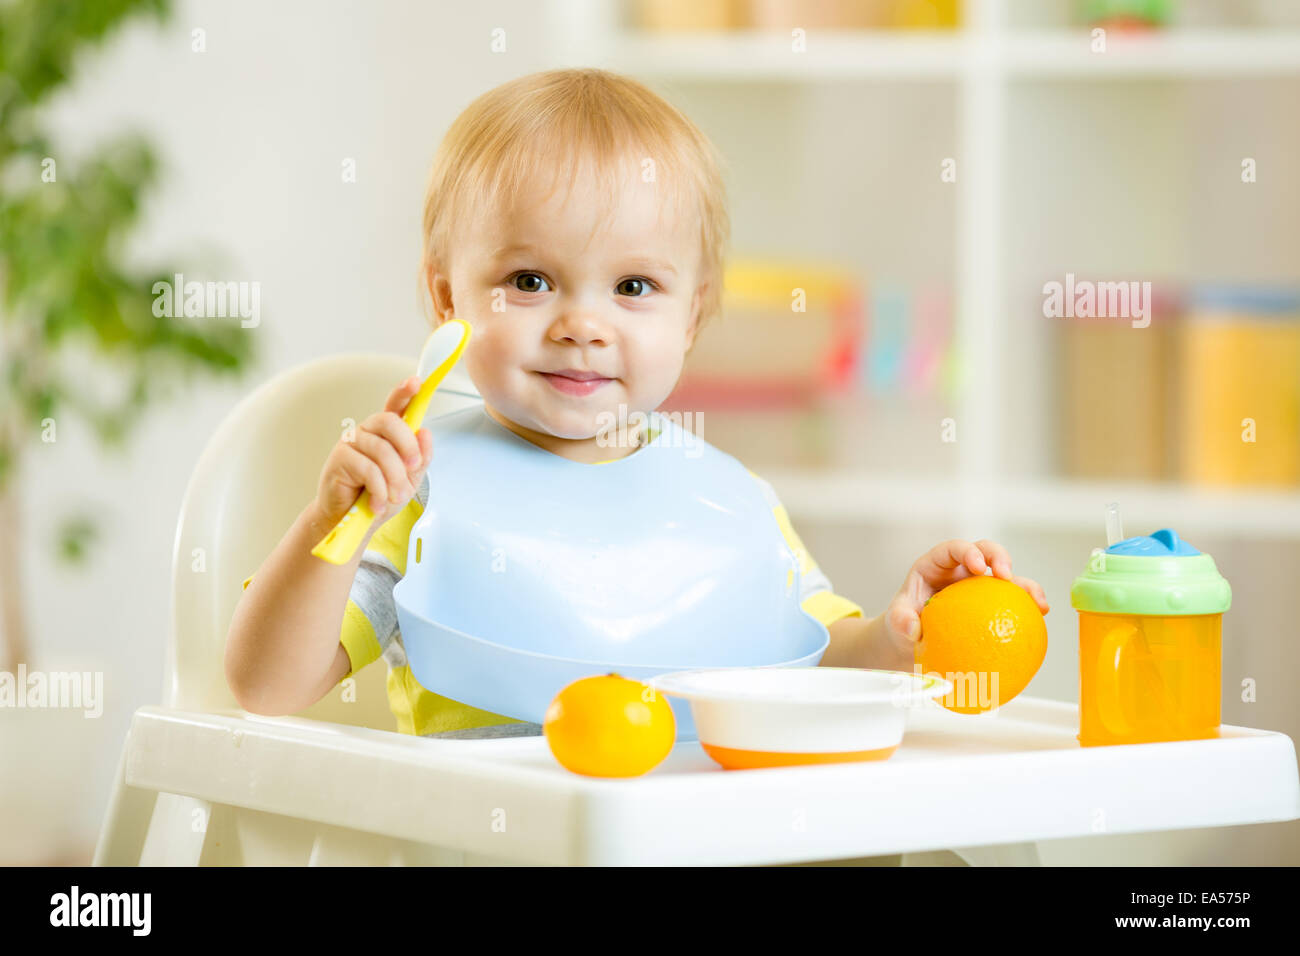 smiling baby child boy eating itself with spoon Stock Photo